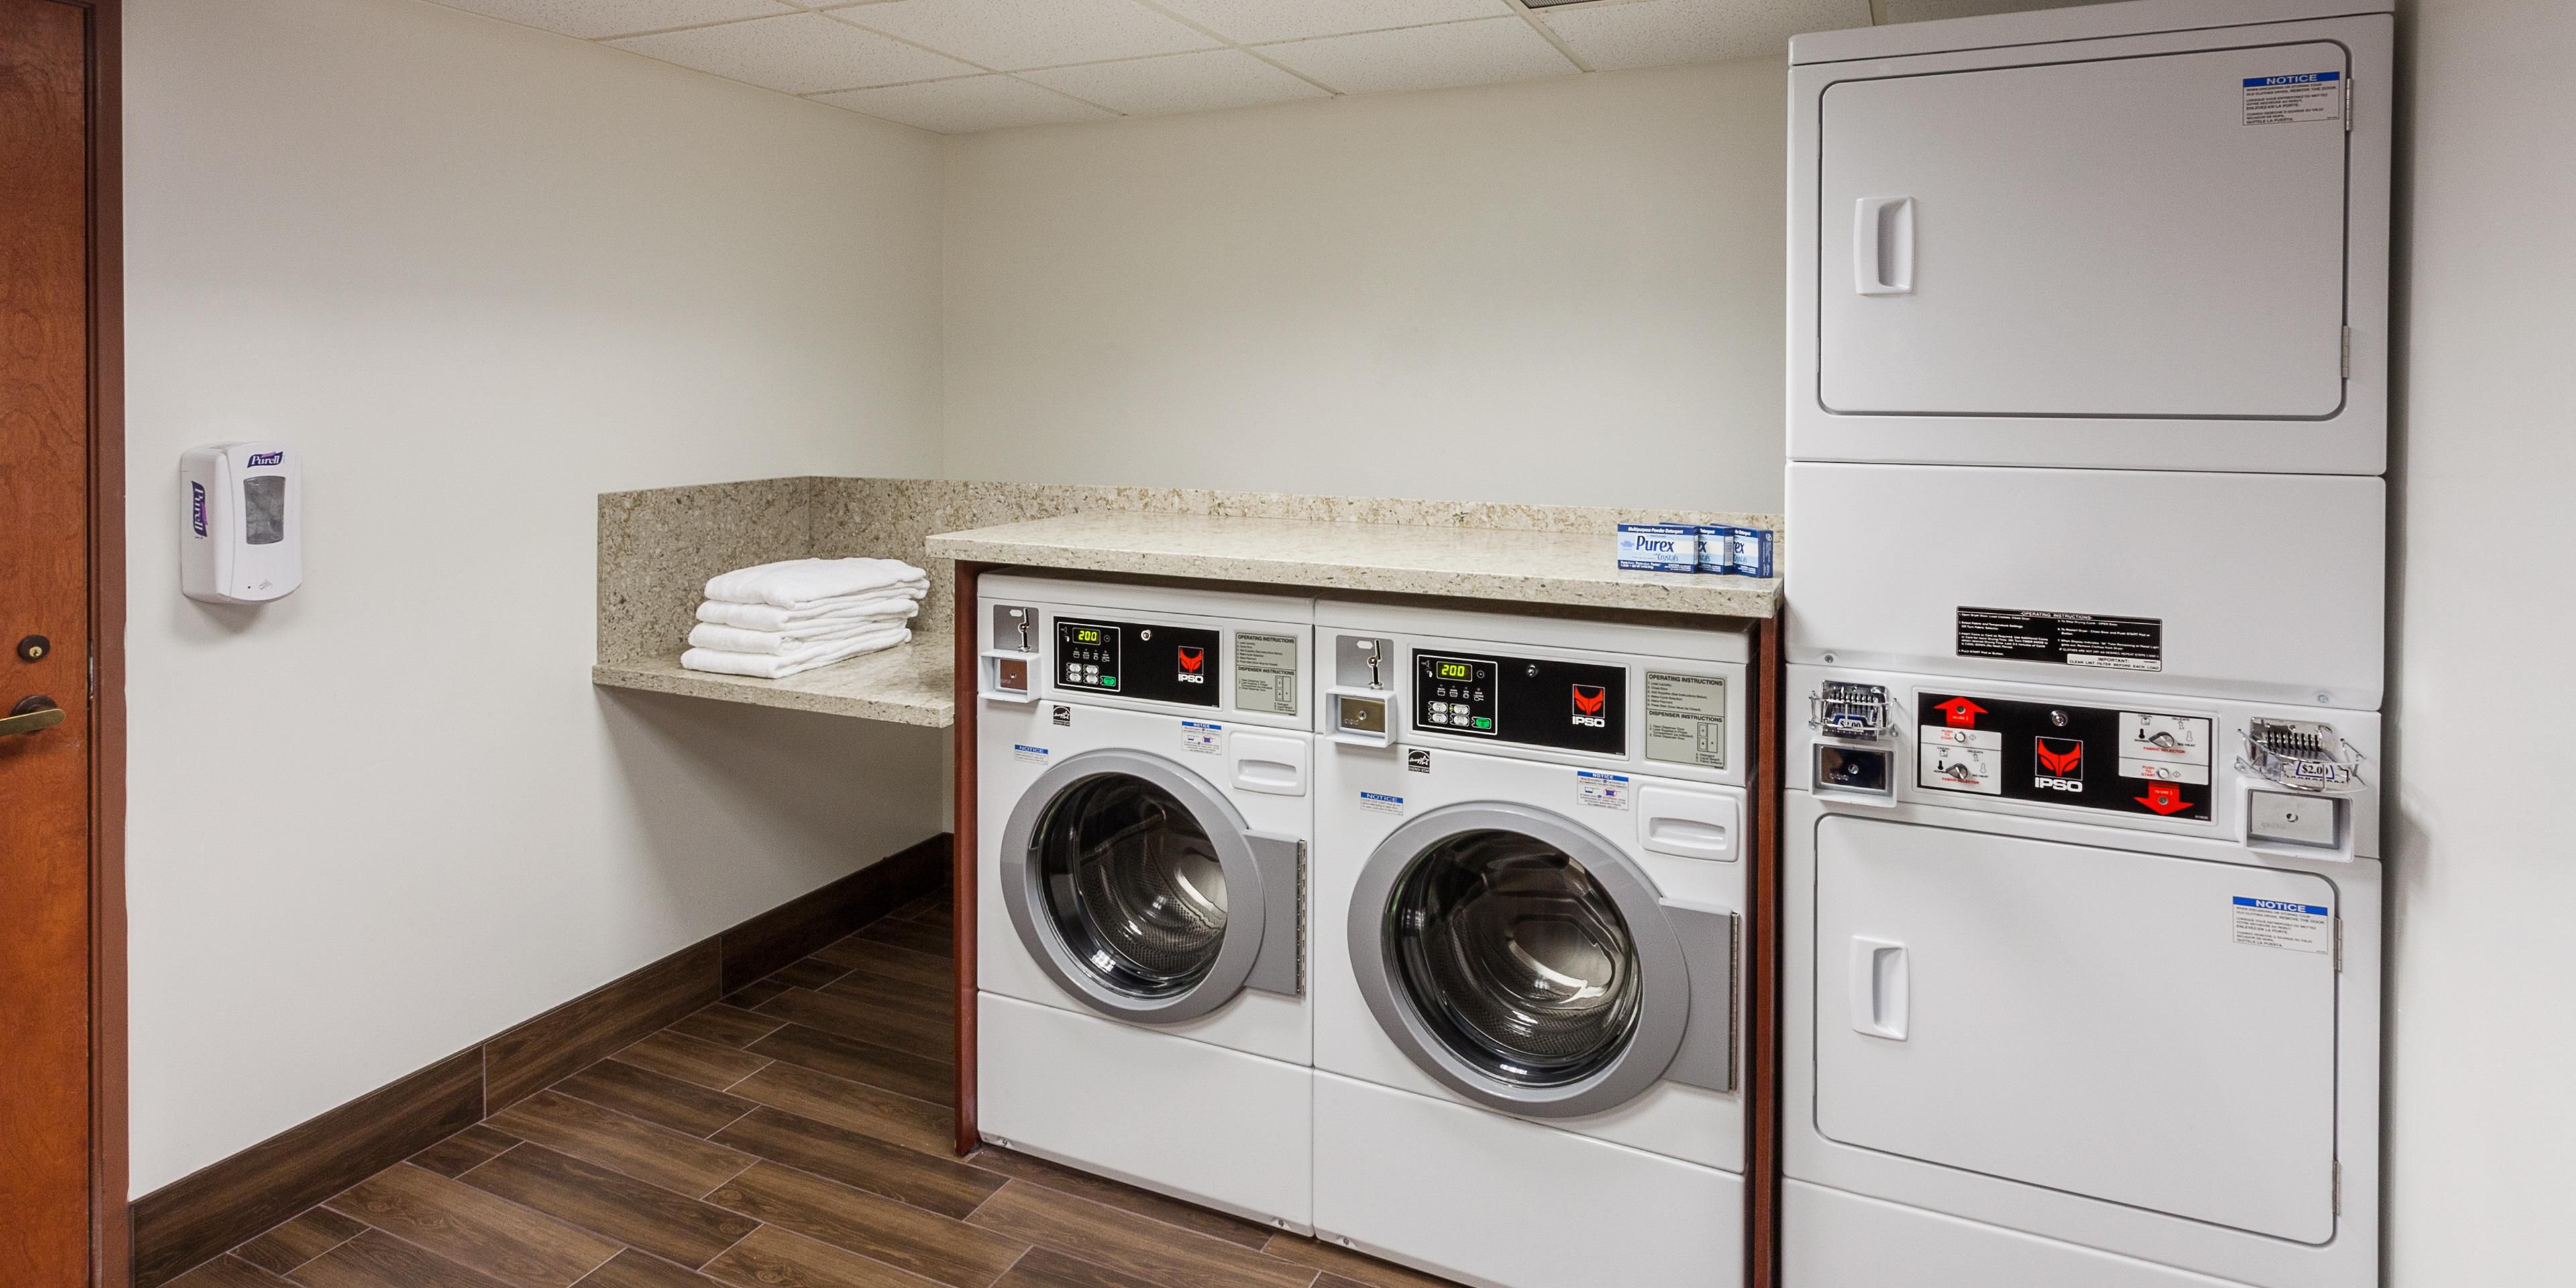 The Holiday Inn Express and Suites Carpinteria offers self-service, coin operated, guest laundry.